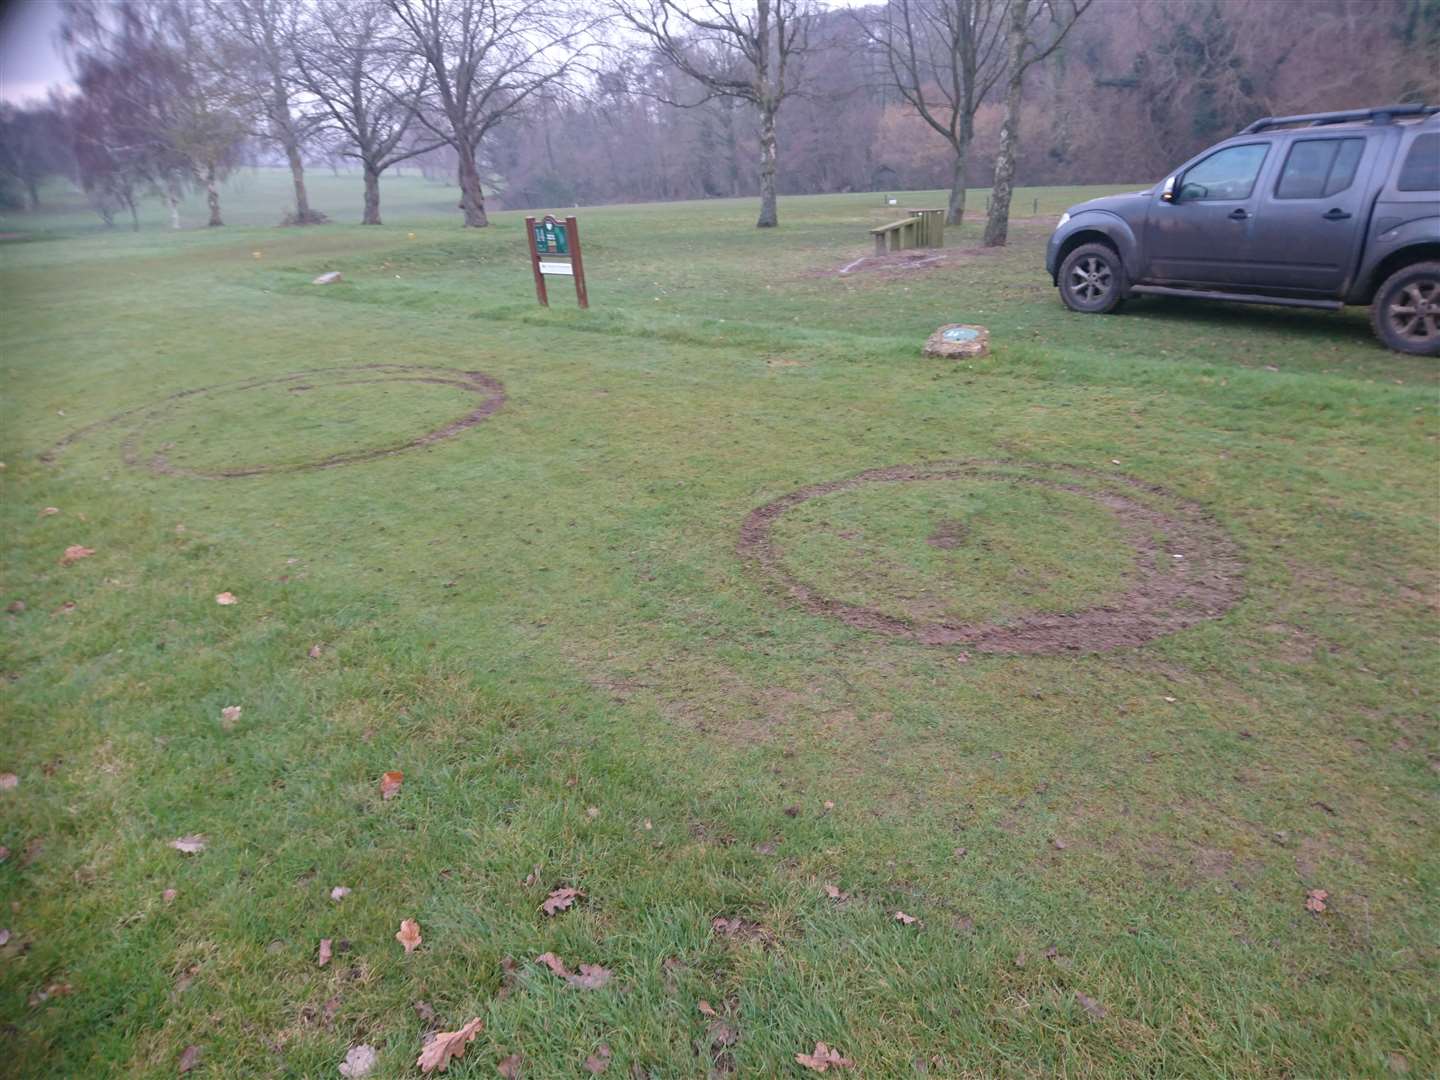 Damage to Canterbury Golf Course grounds by nuisance bikers. Photo: Canterbury Golf Club